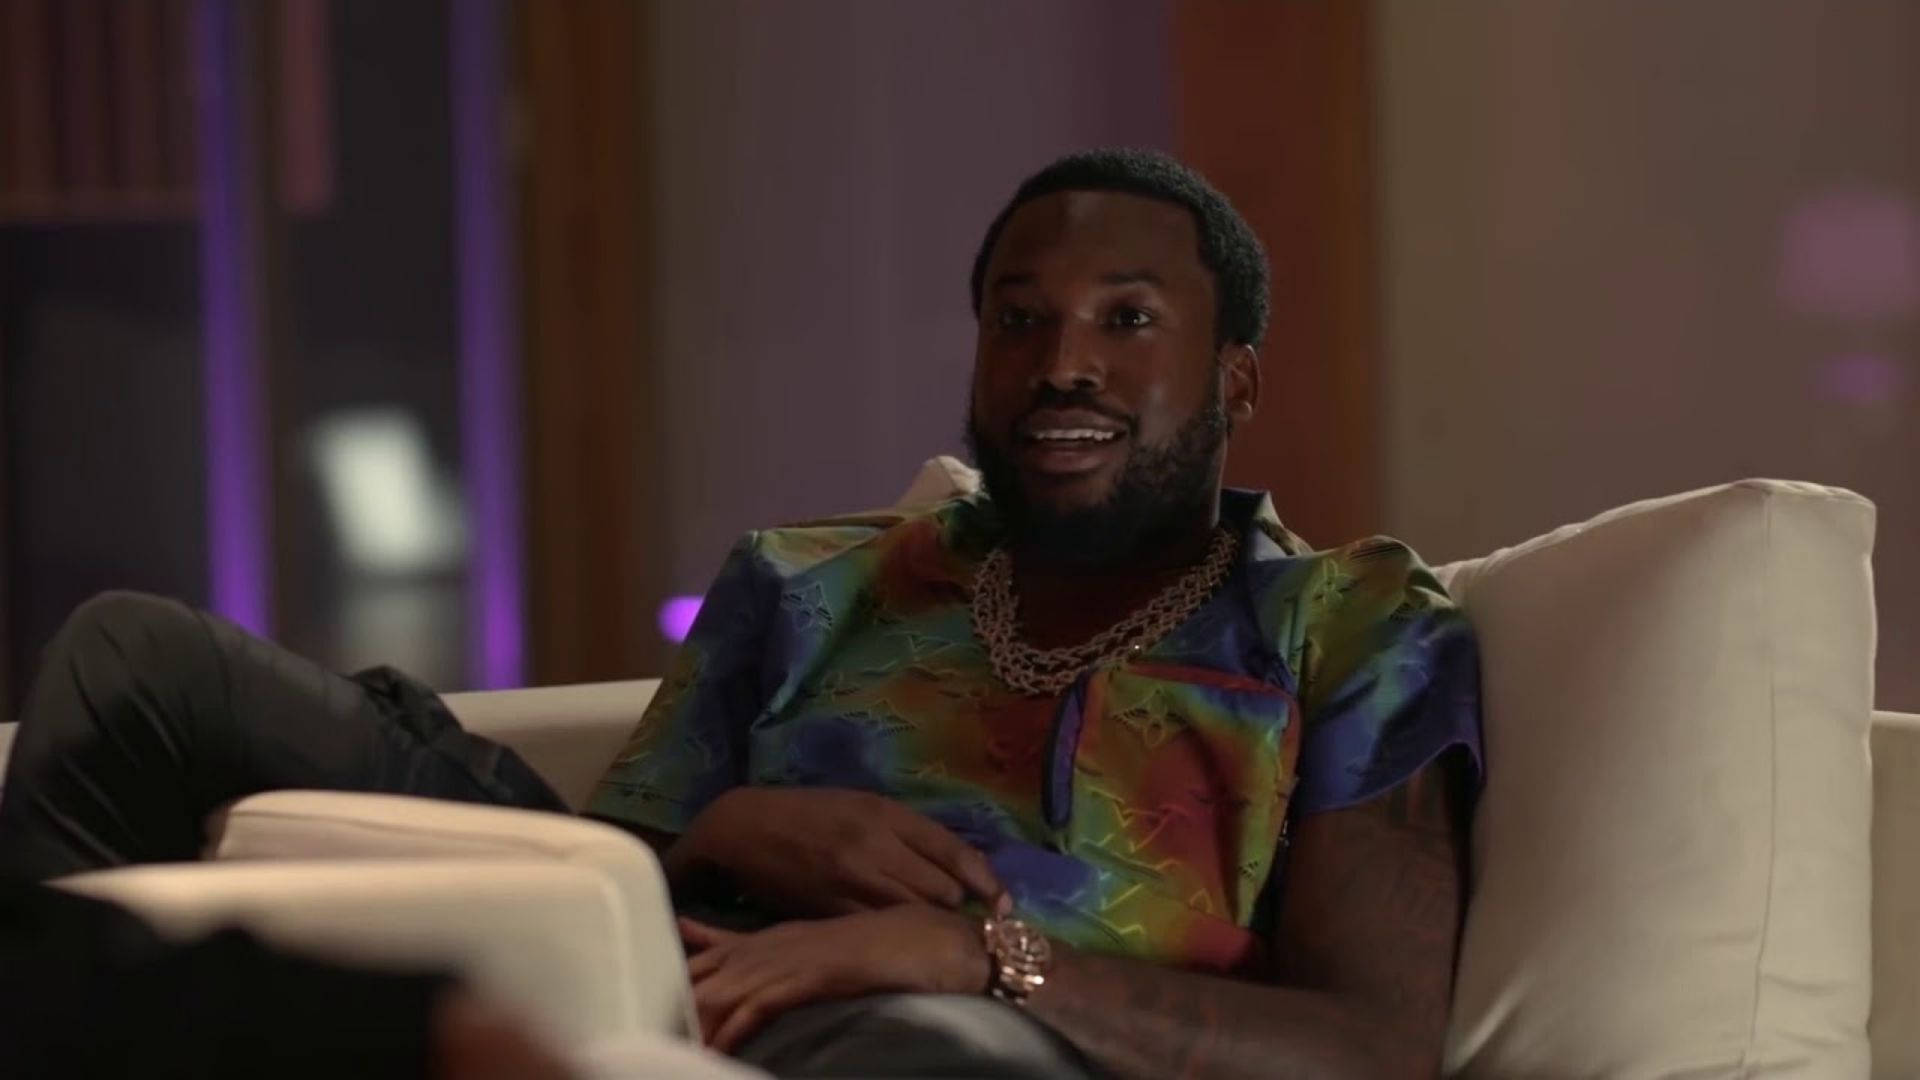 Meek Mill In Colorful Shirt